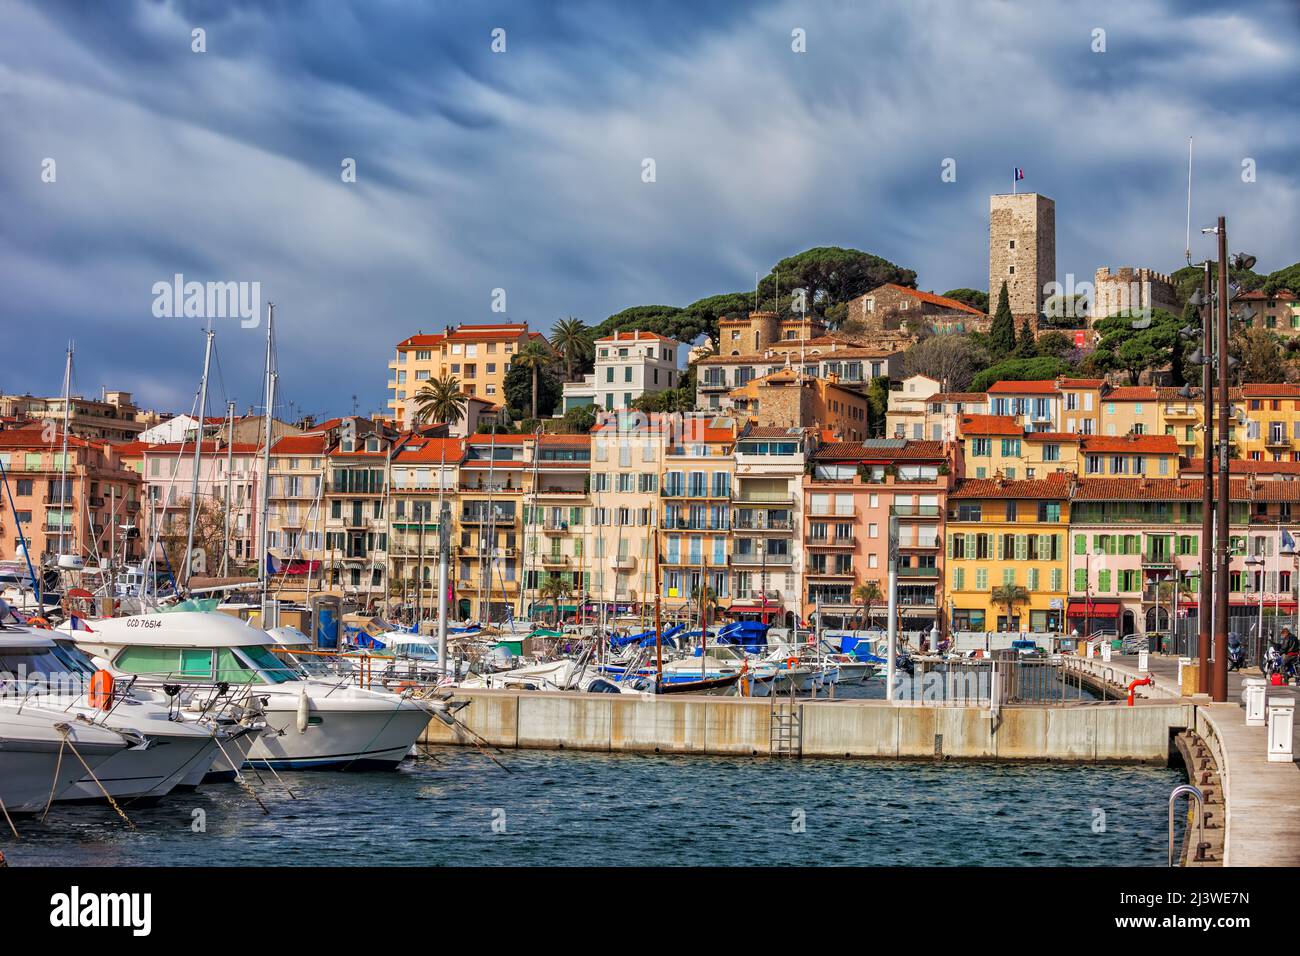 Cannes city skyline in France, view from Port Le Vieux on French Riviera to Le Suquet, the Old Town. Stock Photo